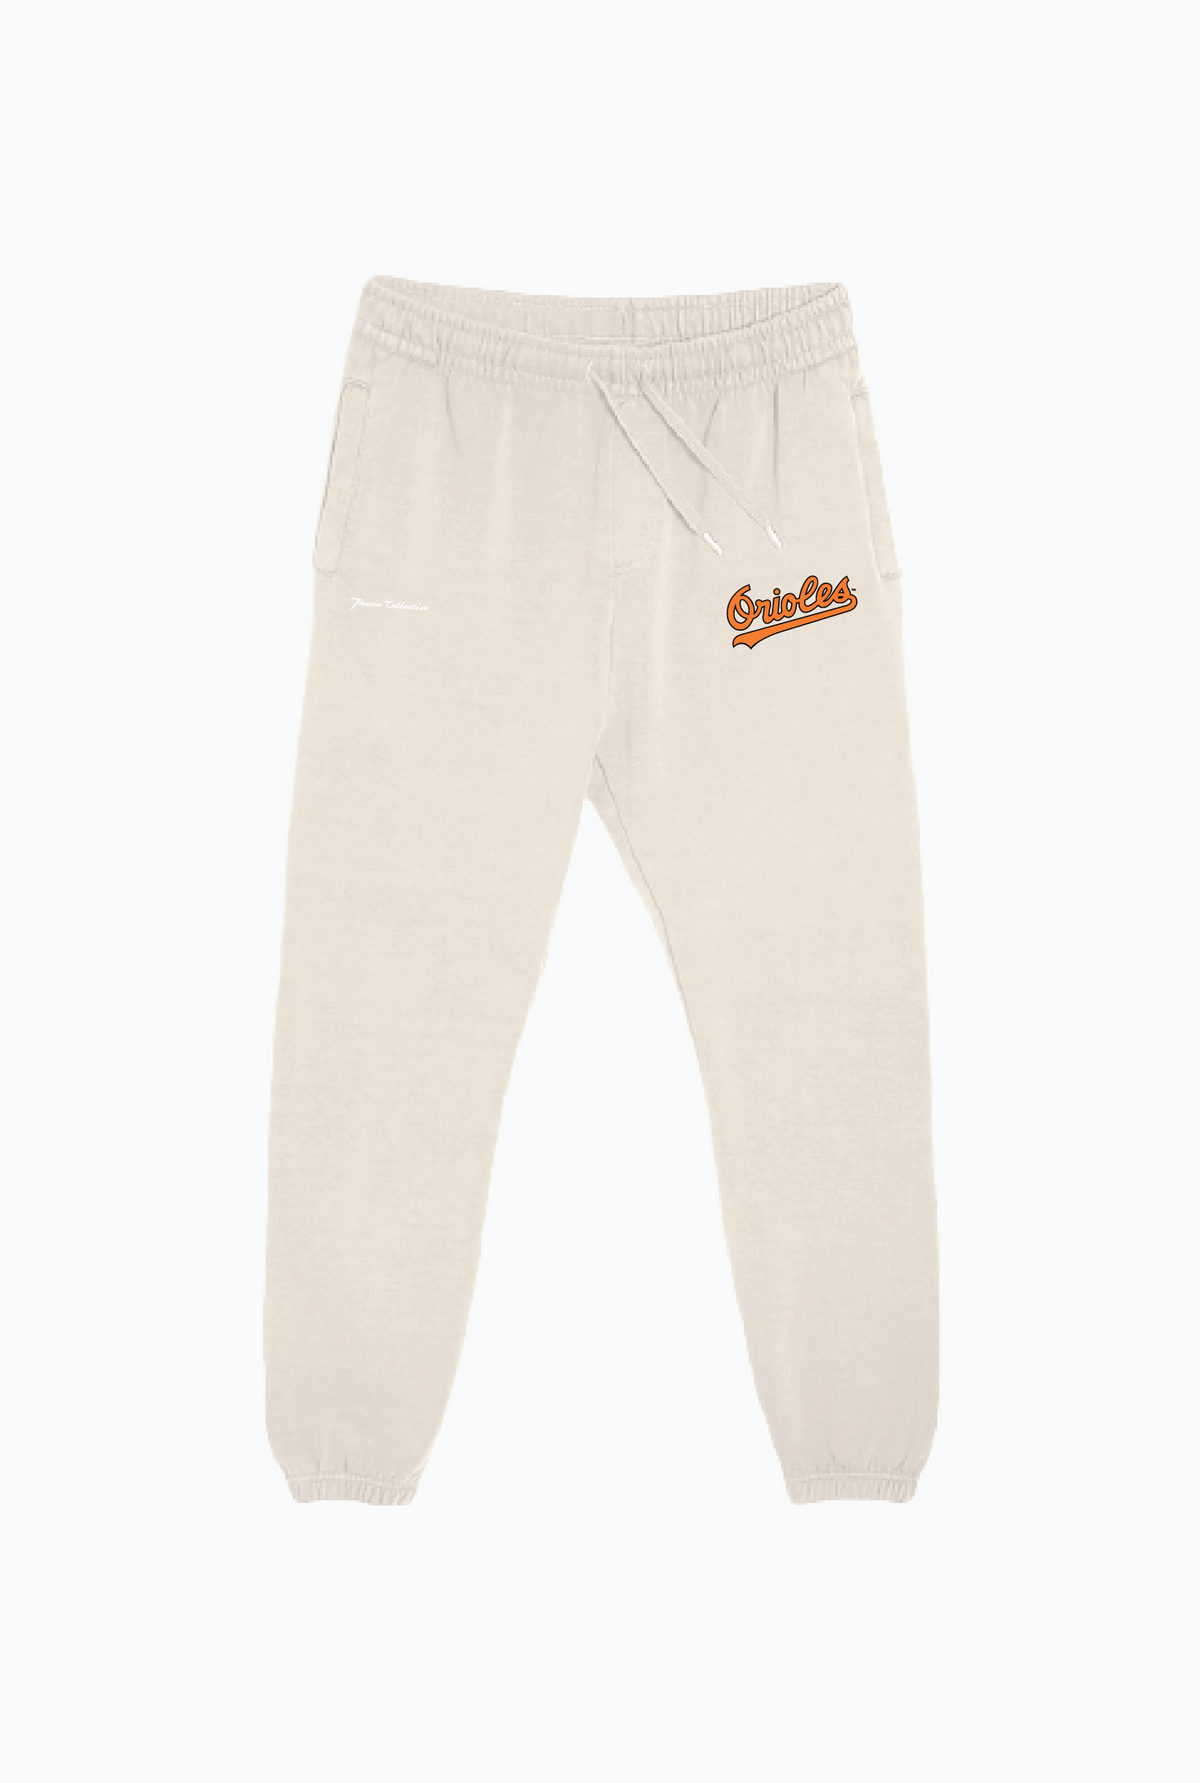 Baltimore Orioles Heavyweight Jogger - Ivory